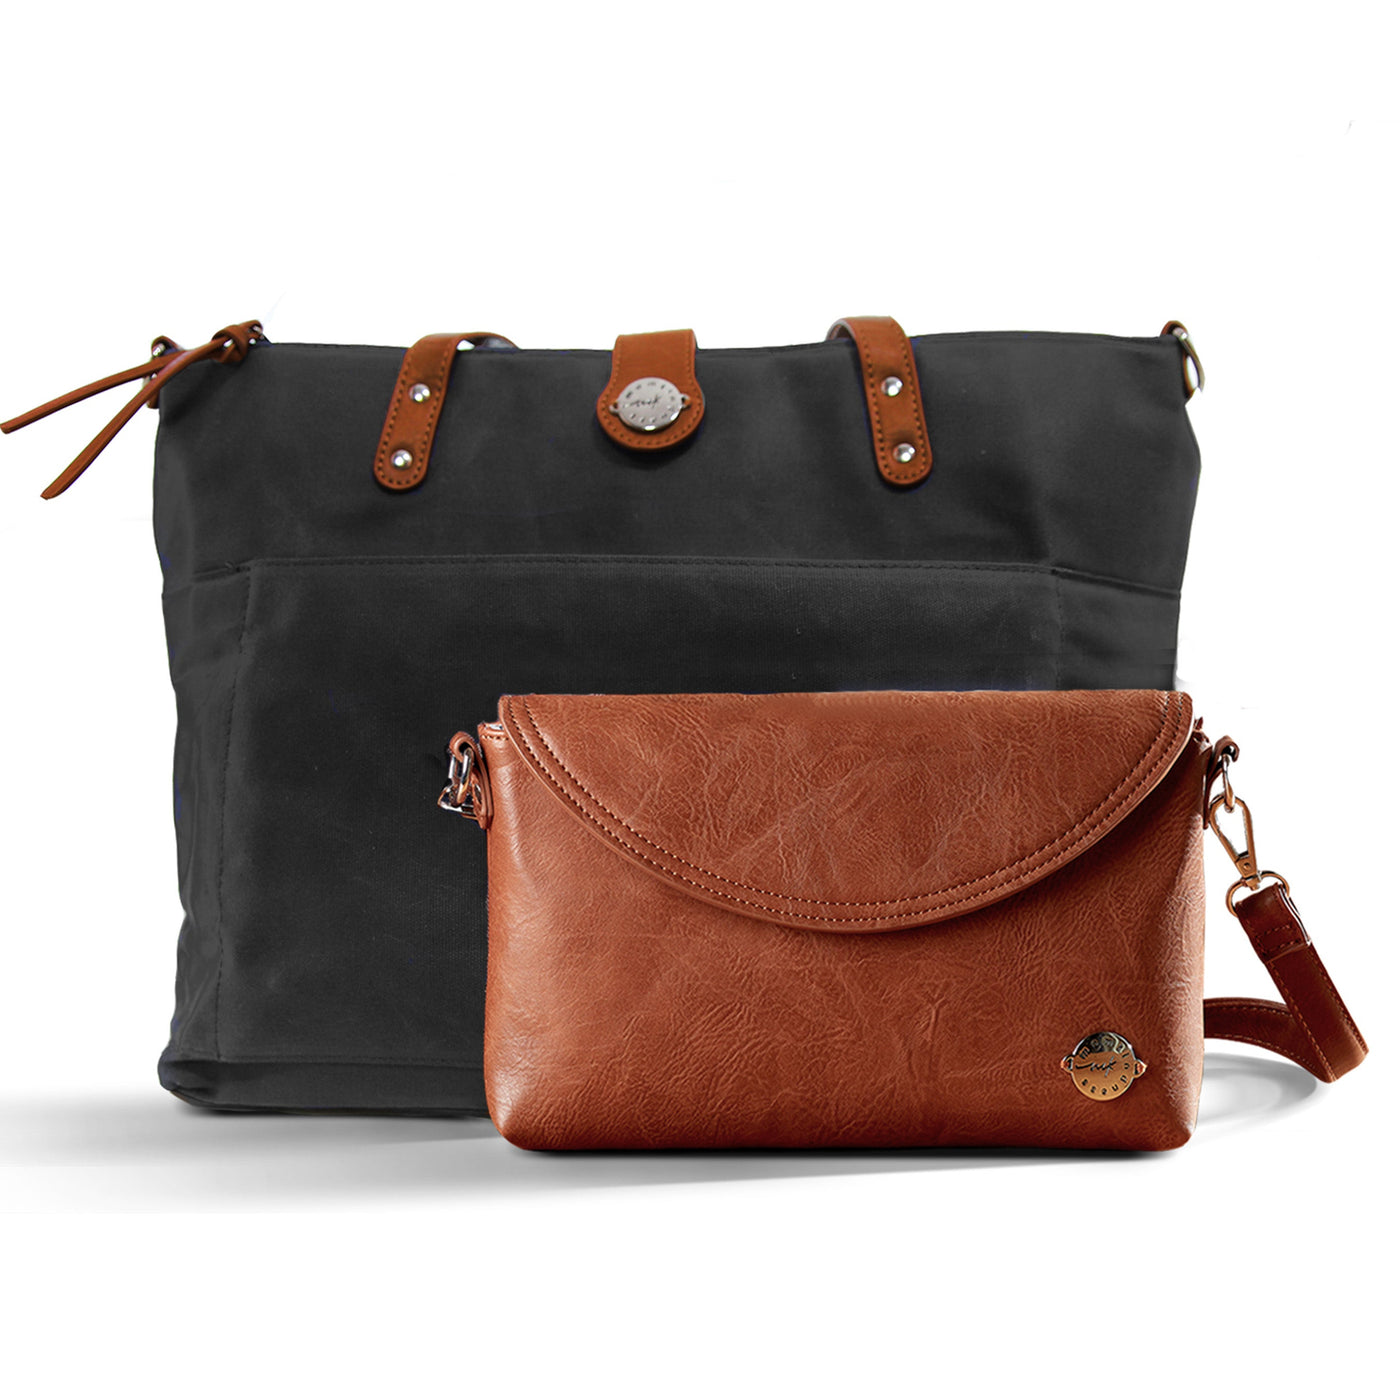 Black waxed canvas tote with brown vegan leather accents and brown vegan leather diaper clutch, all on a white background.